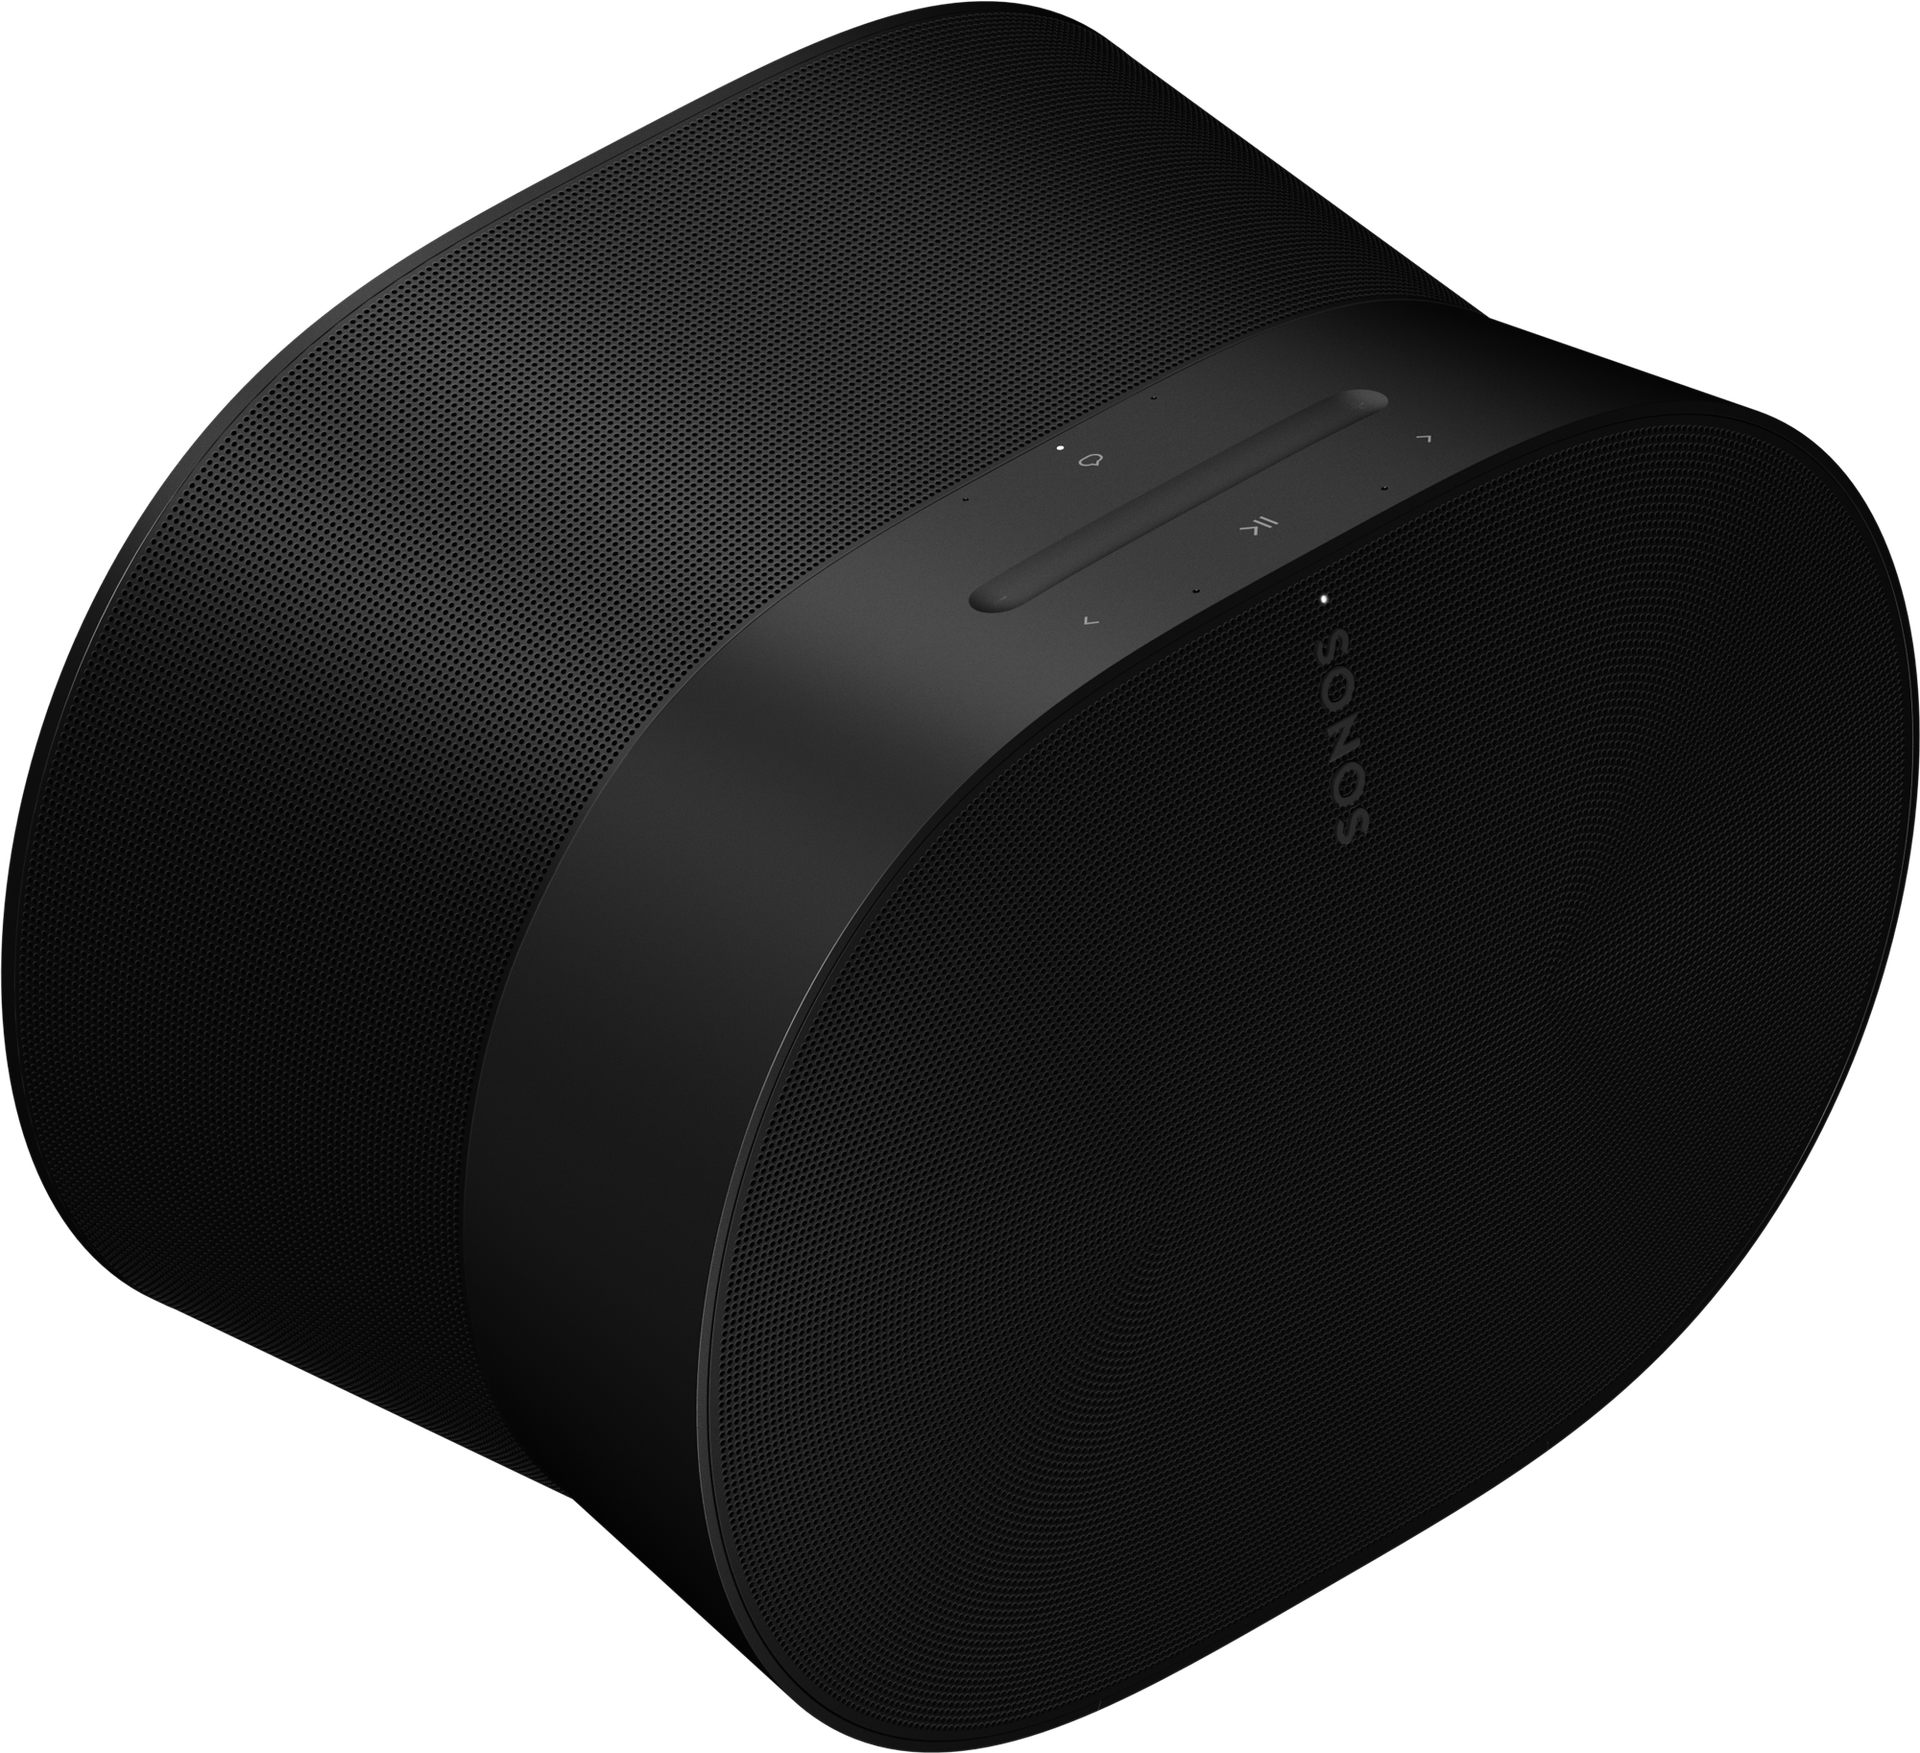 Era 300: The Spatial Audio Speaker With Dolby Atmos | Sonos